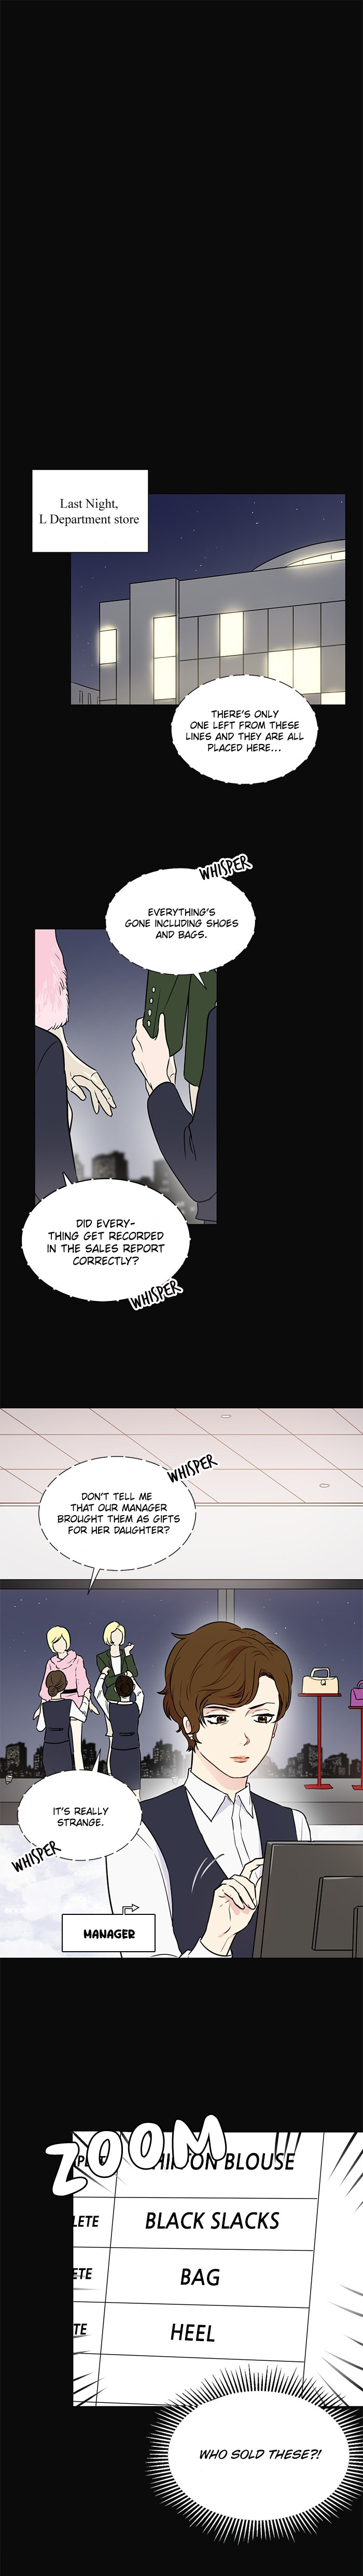 Charming Grim Reaper - Page 1